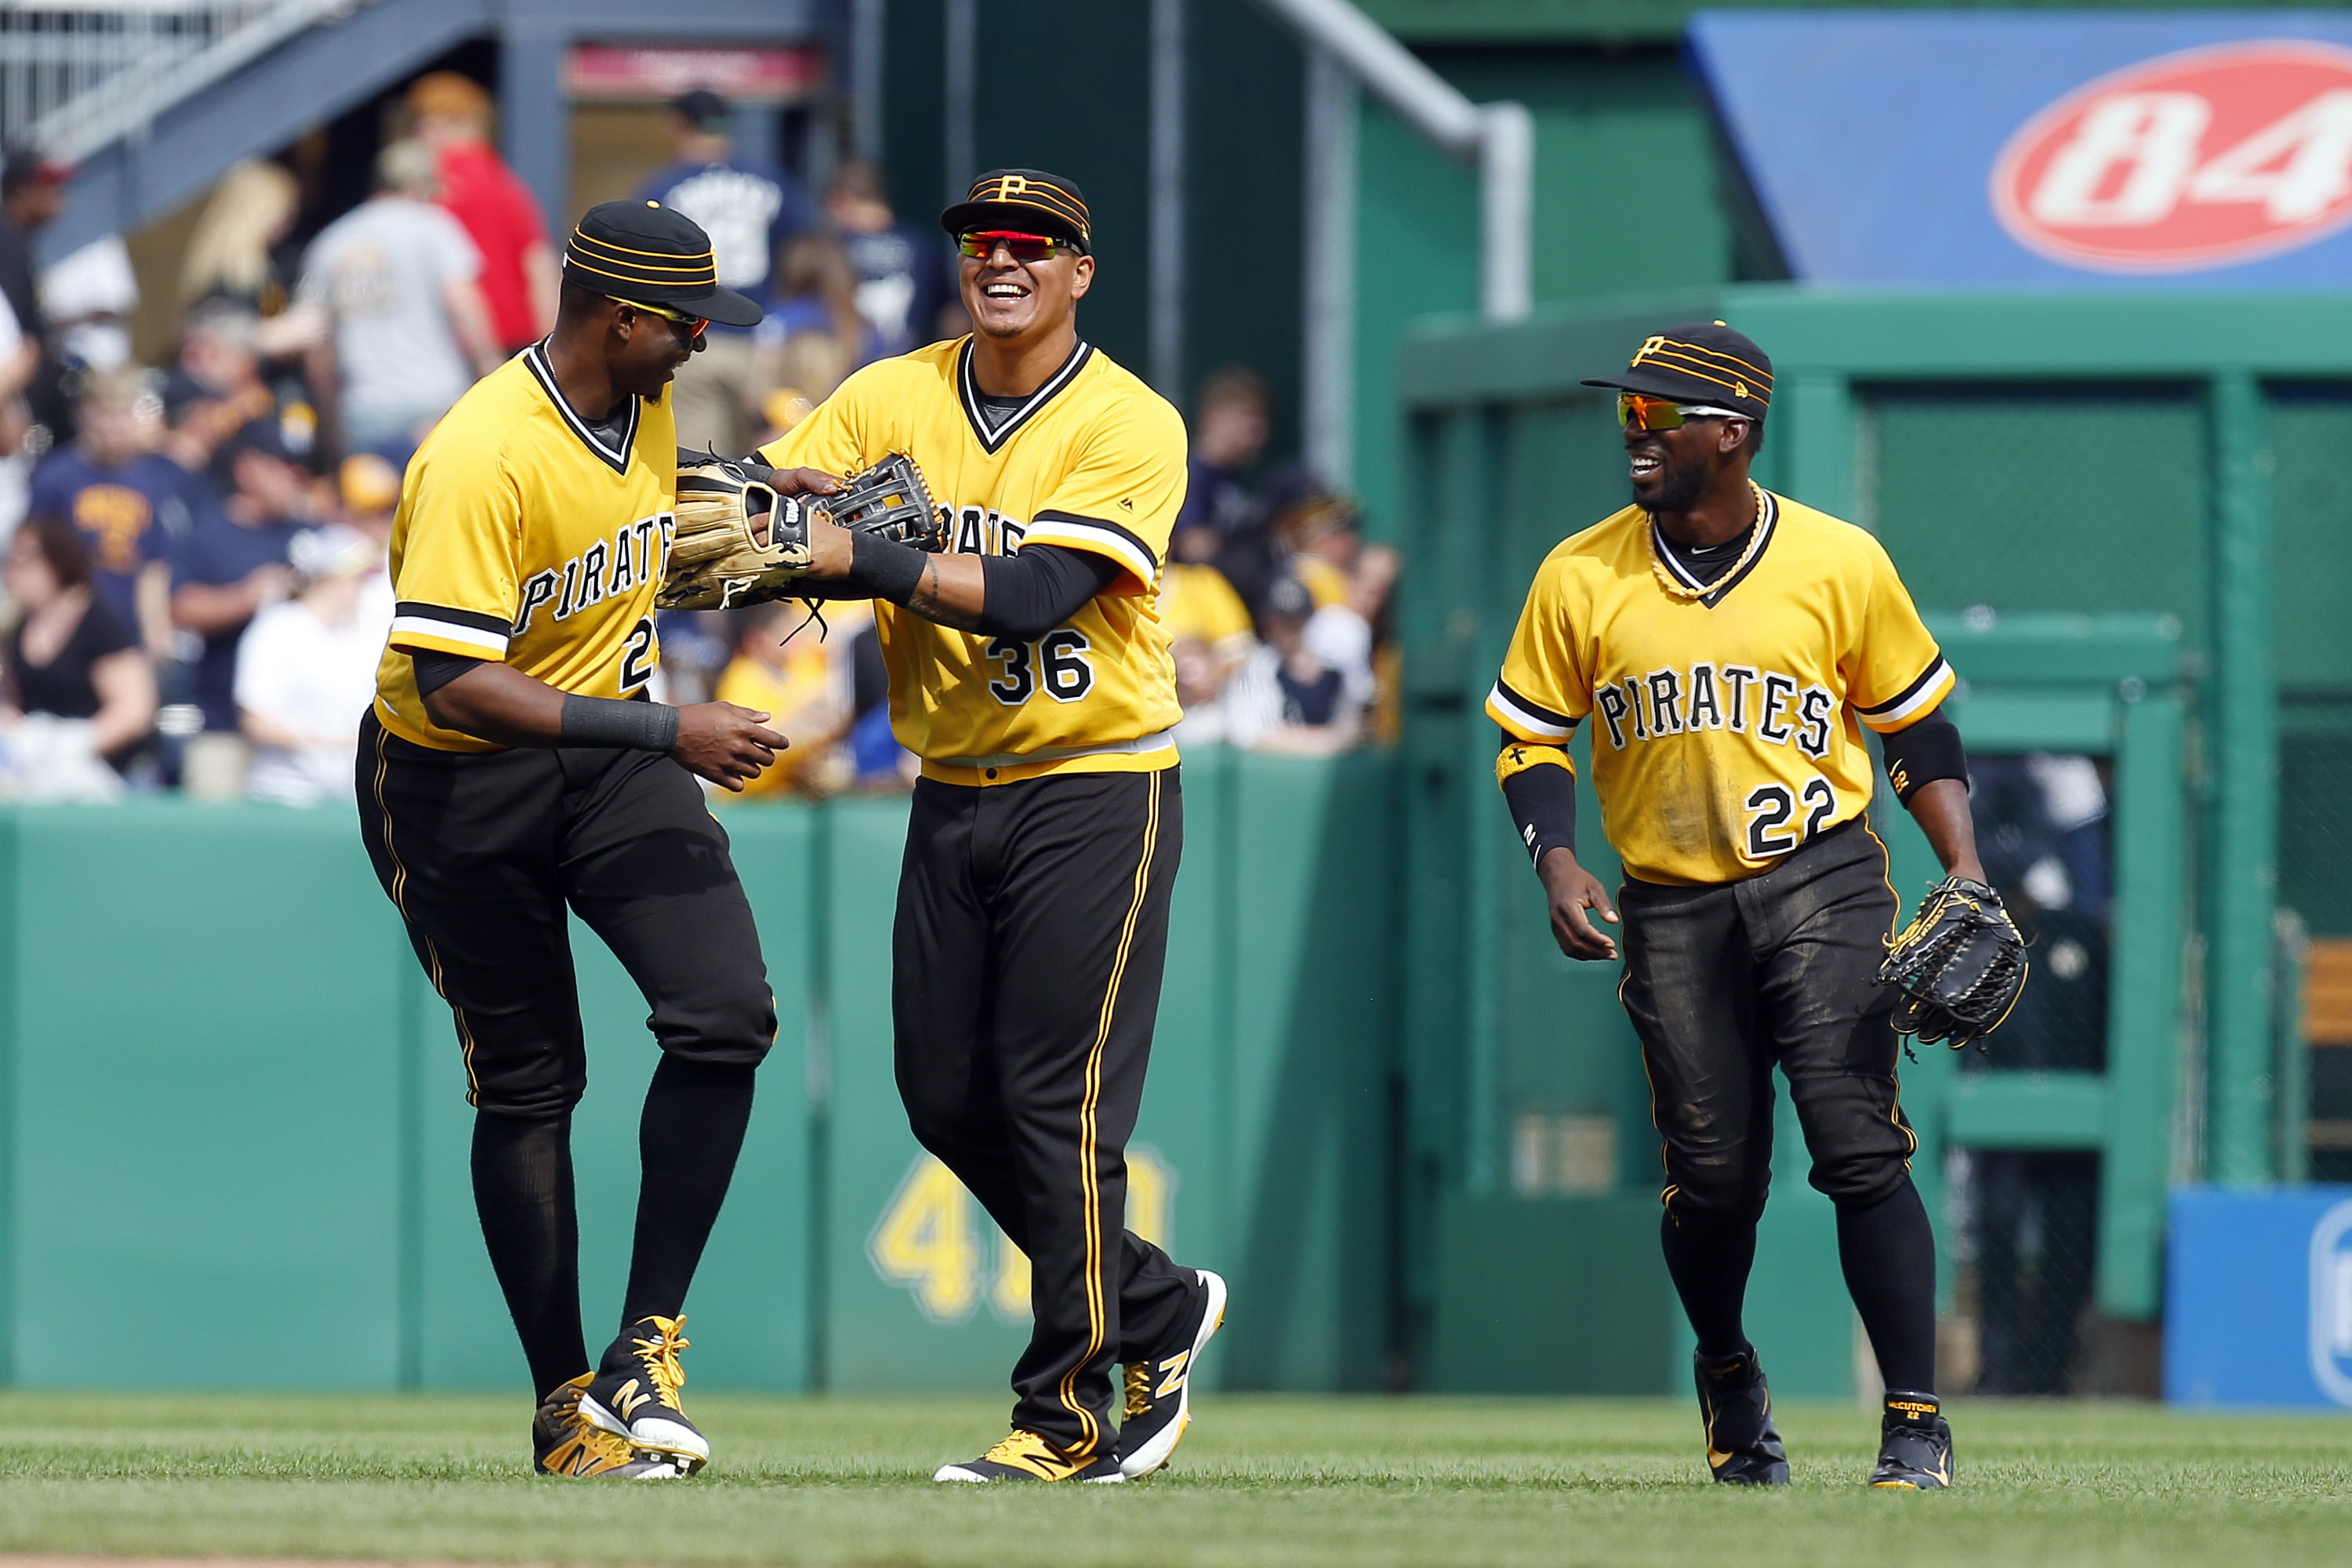 MLB rule changes quickly catching on with Pirates fans  TribLIVEcom